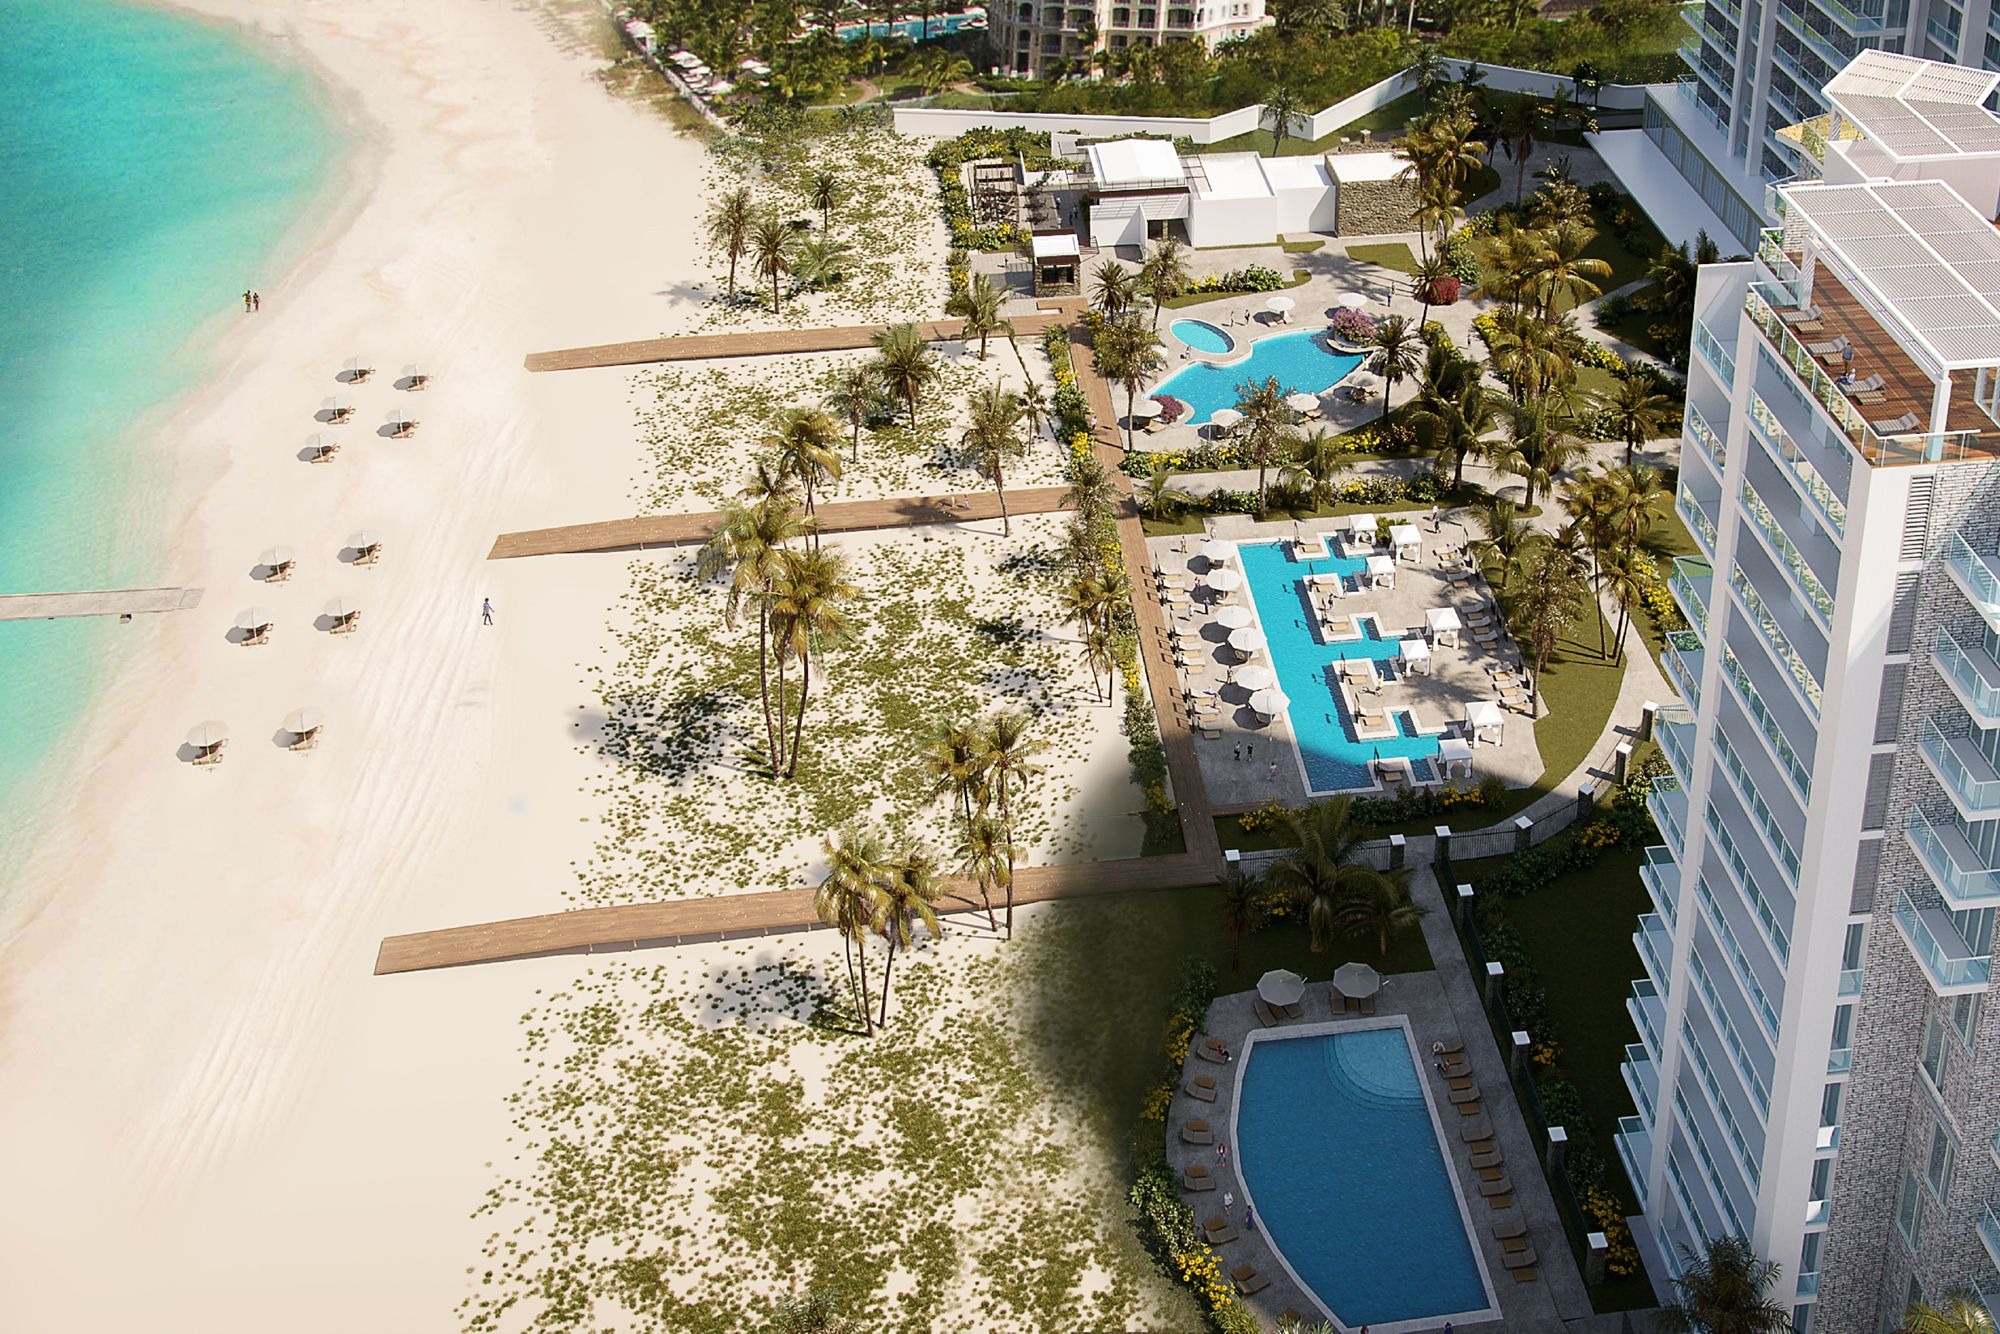 Aerial view of pools and beaches at the new Ritz-Carlton Turks & Caicos resort